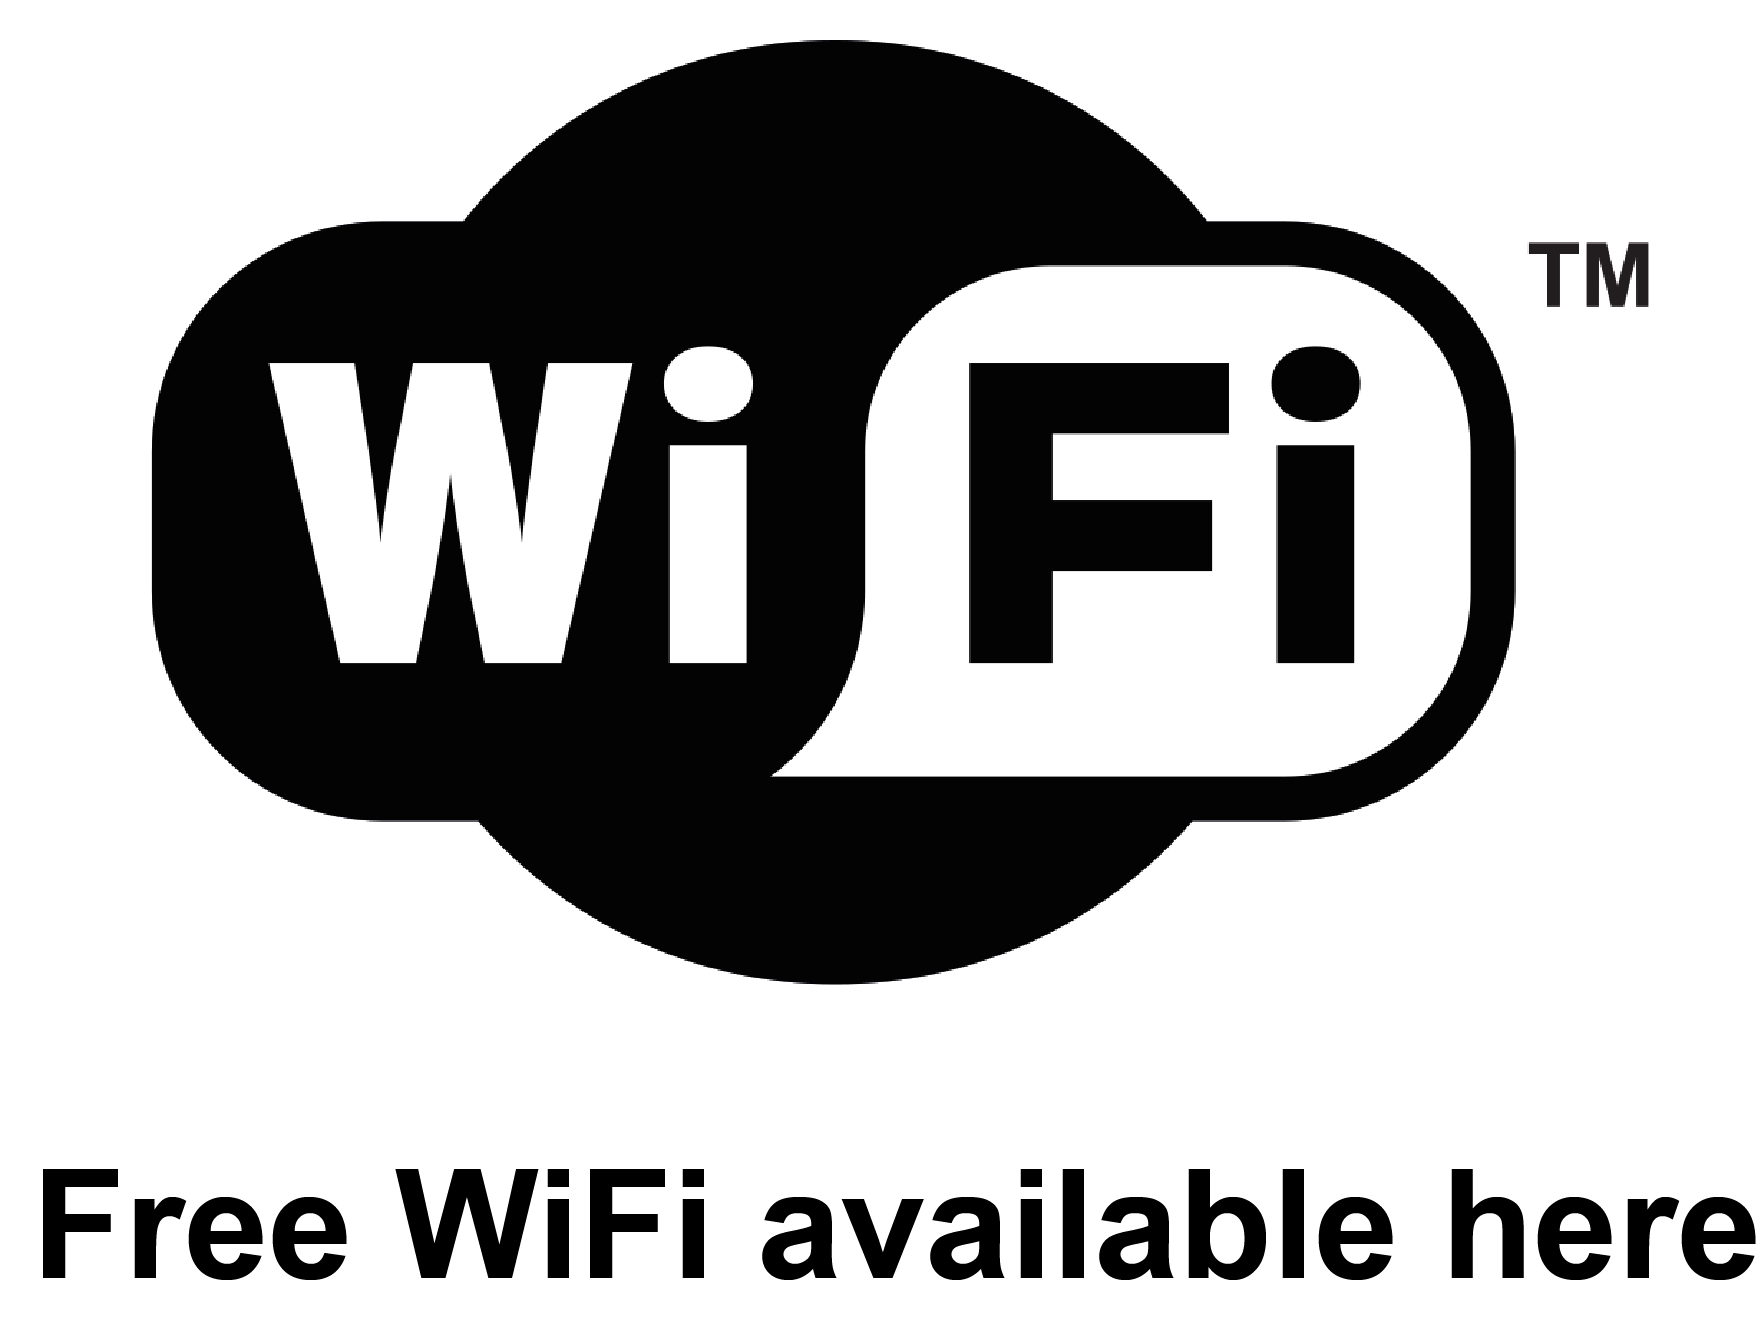 WiFi available labels